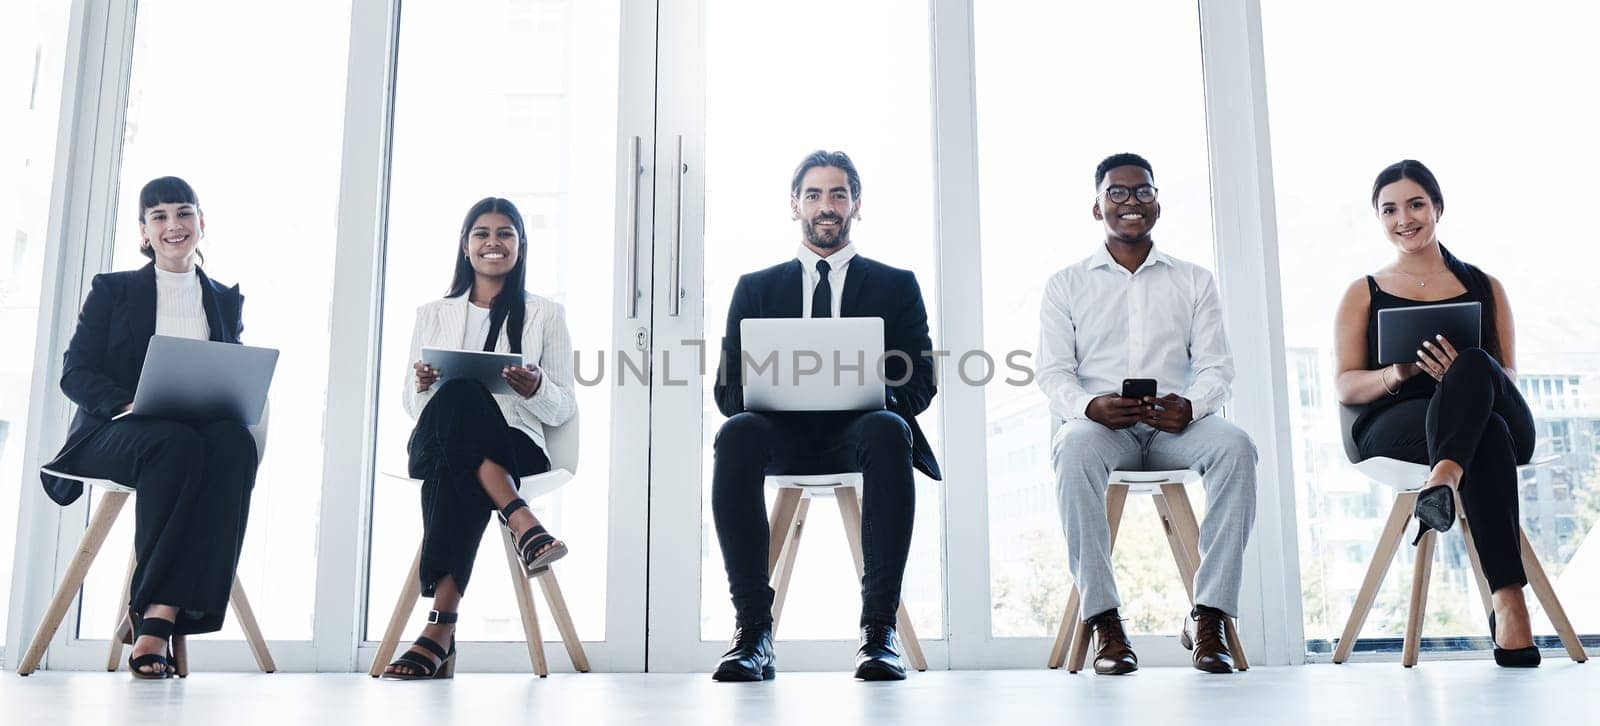 Line, group portrait and people in waiting room with technology and diversity at interview in office. Happy faces, hiring of men and women with business team online for recruitment or human resources.